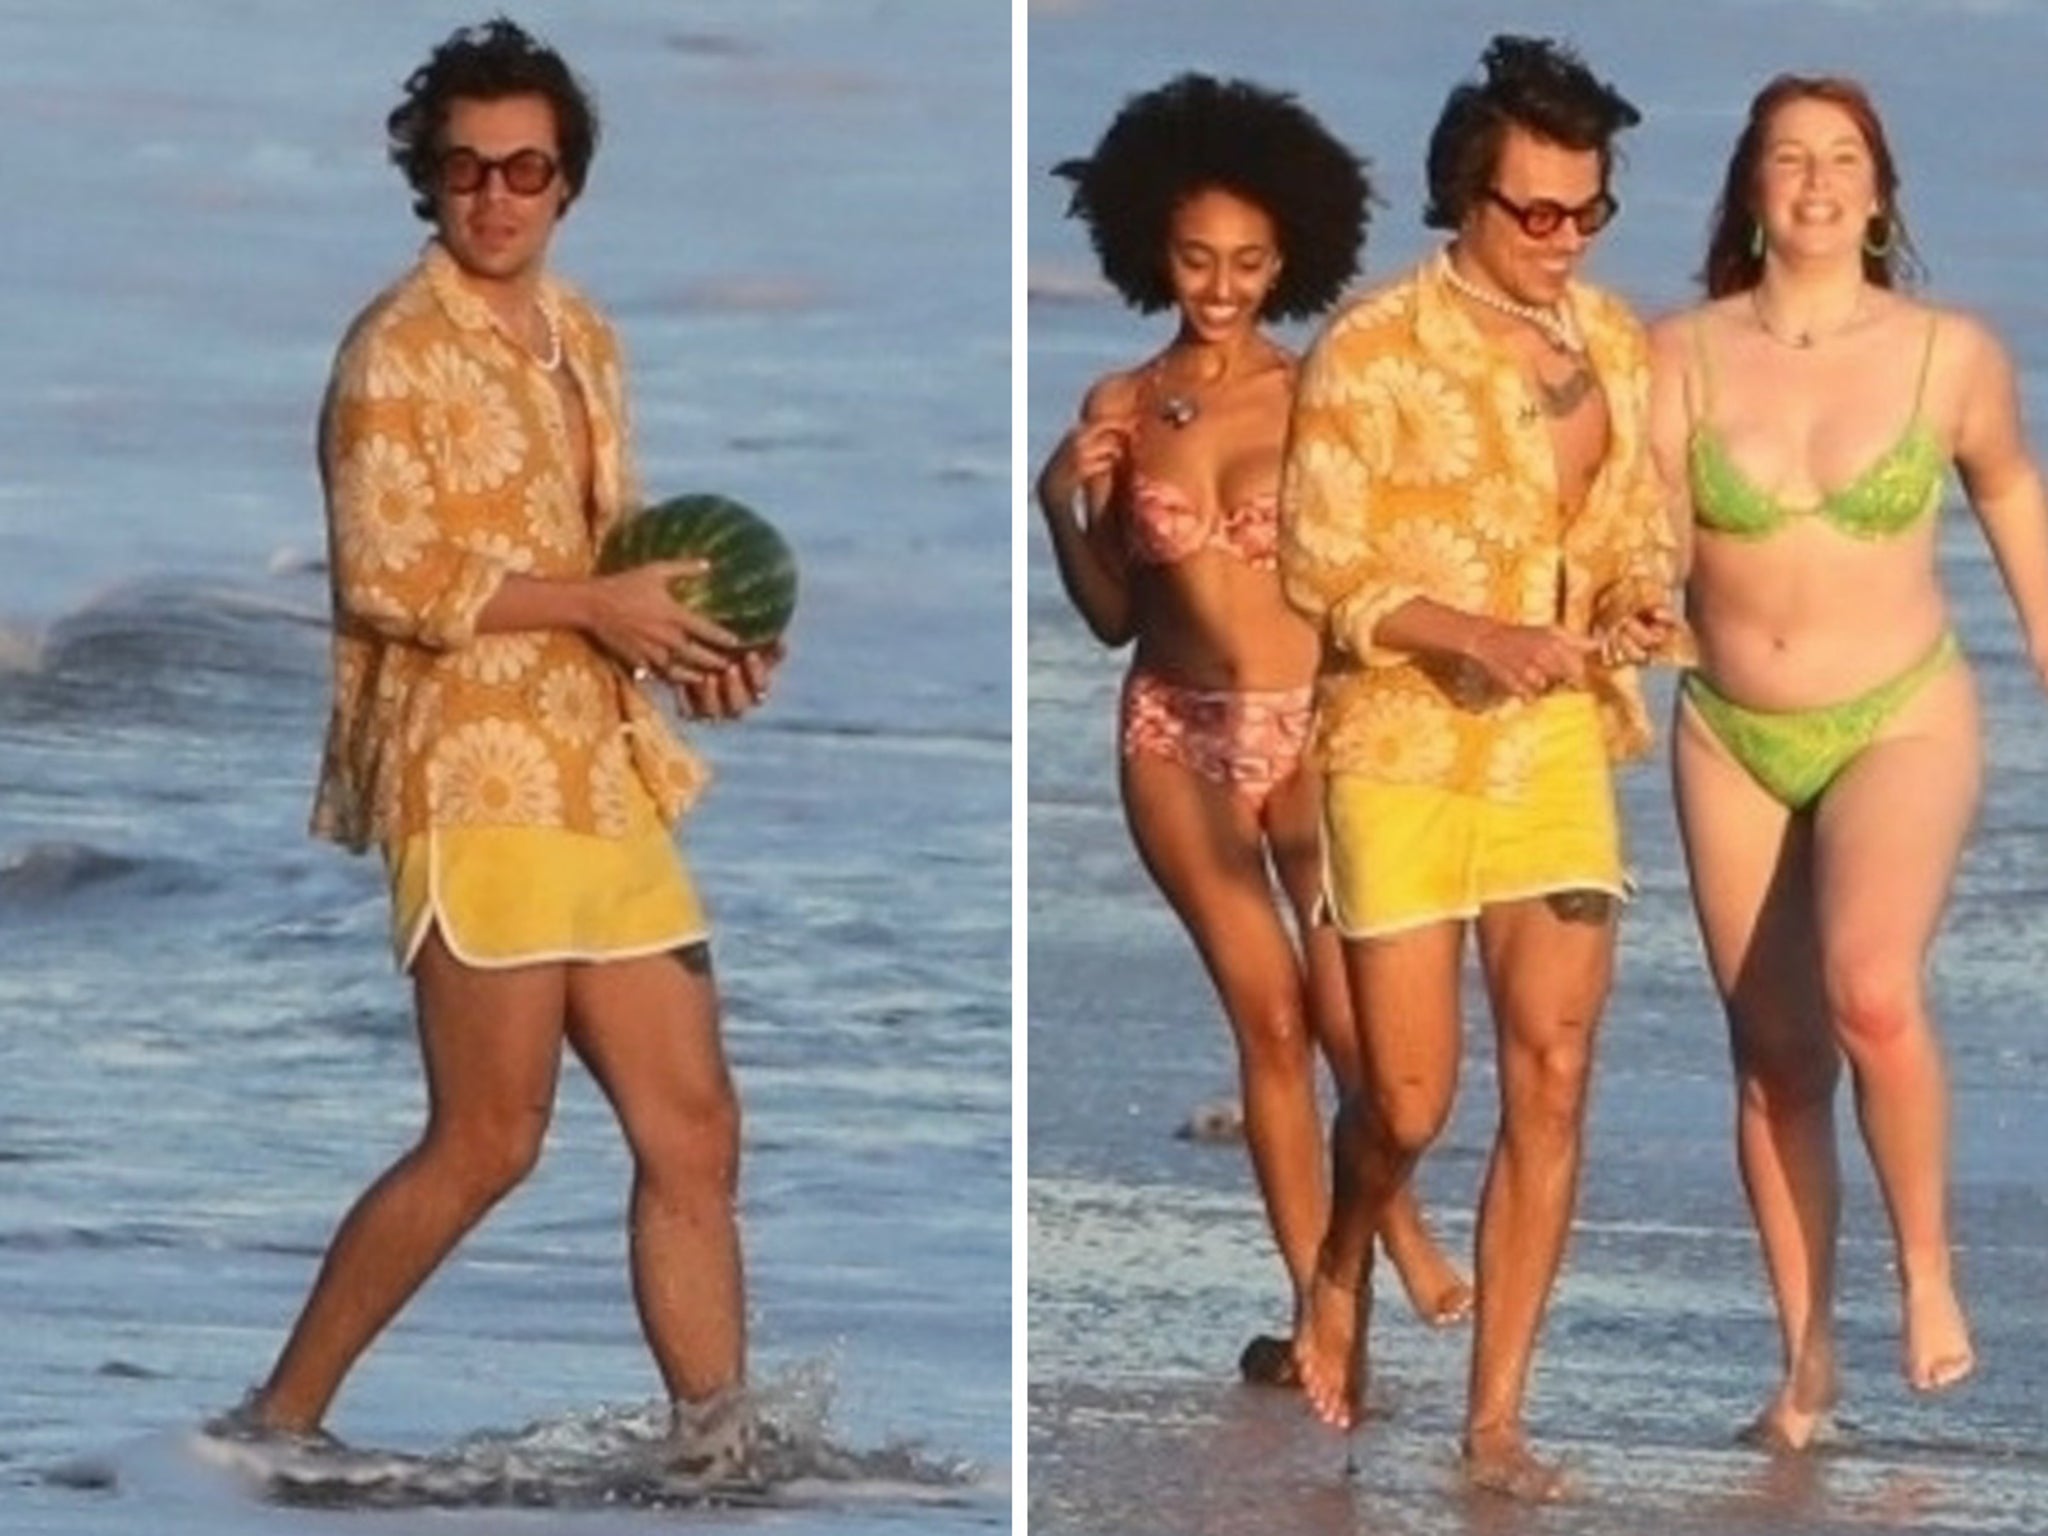 Harry Styles Tosses Watermelon With Models For New Music Video